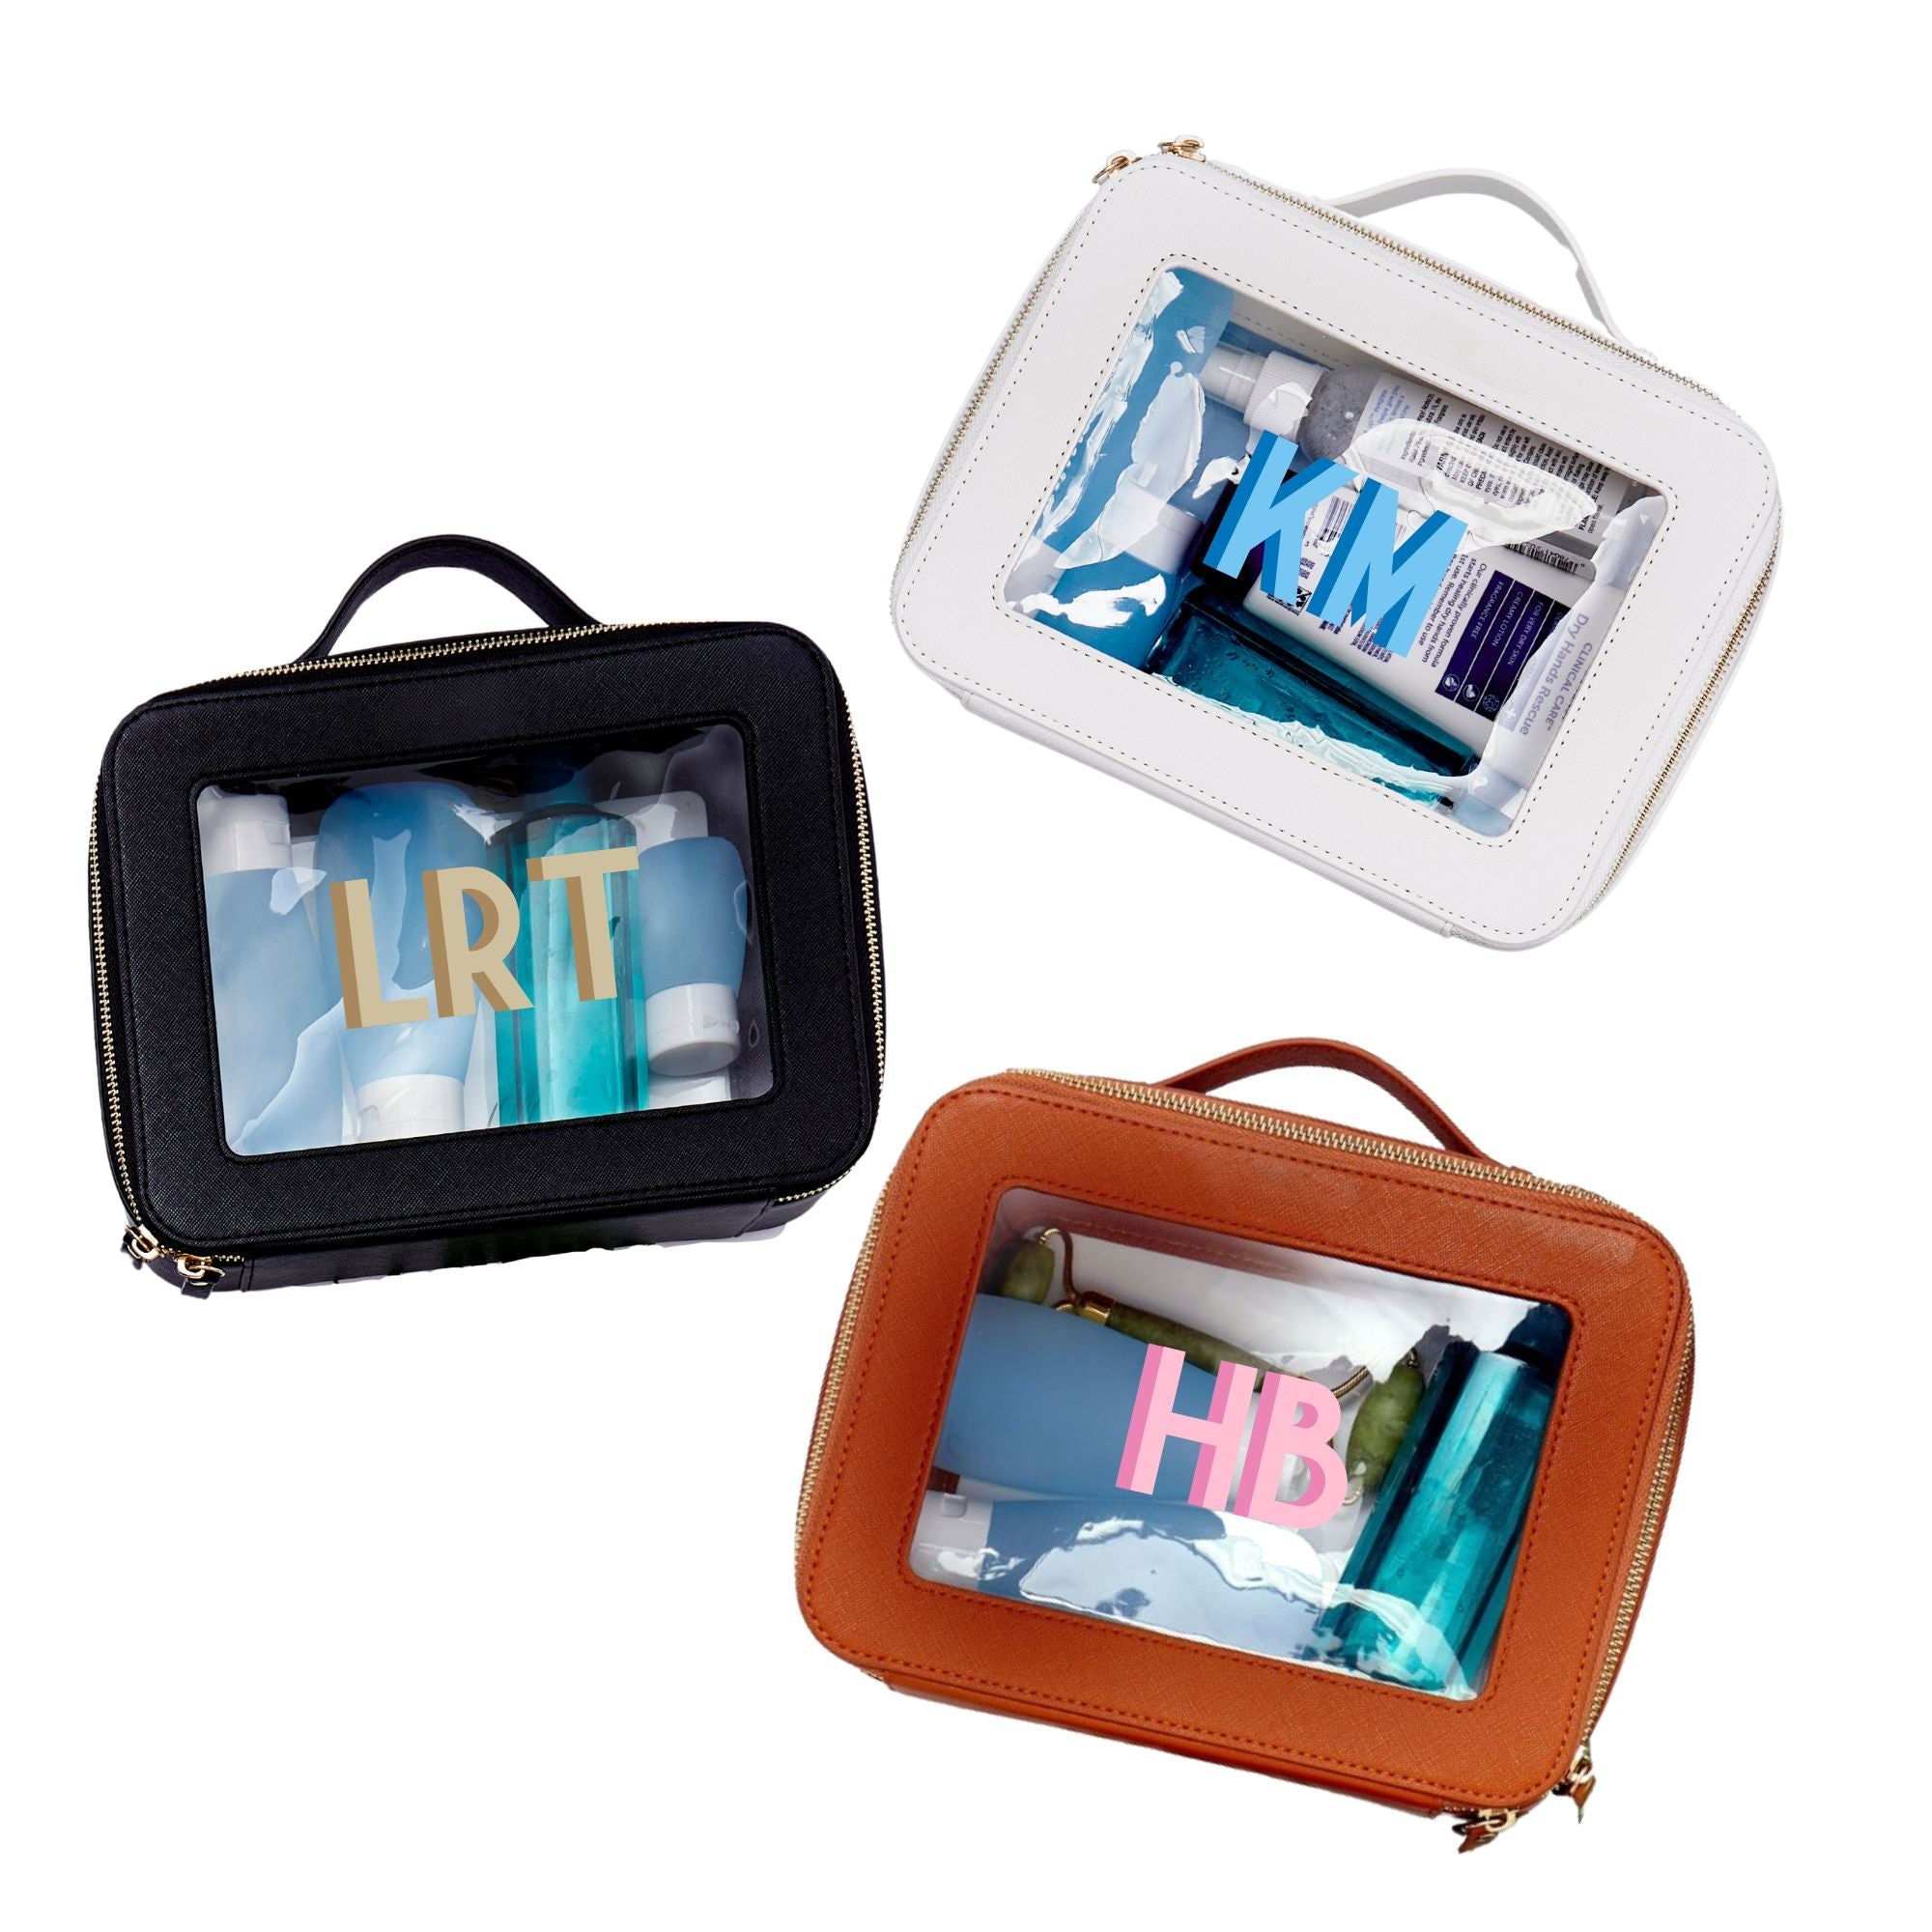 A group of white, tan, and black train cases are personalized with colorful monograms.